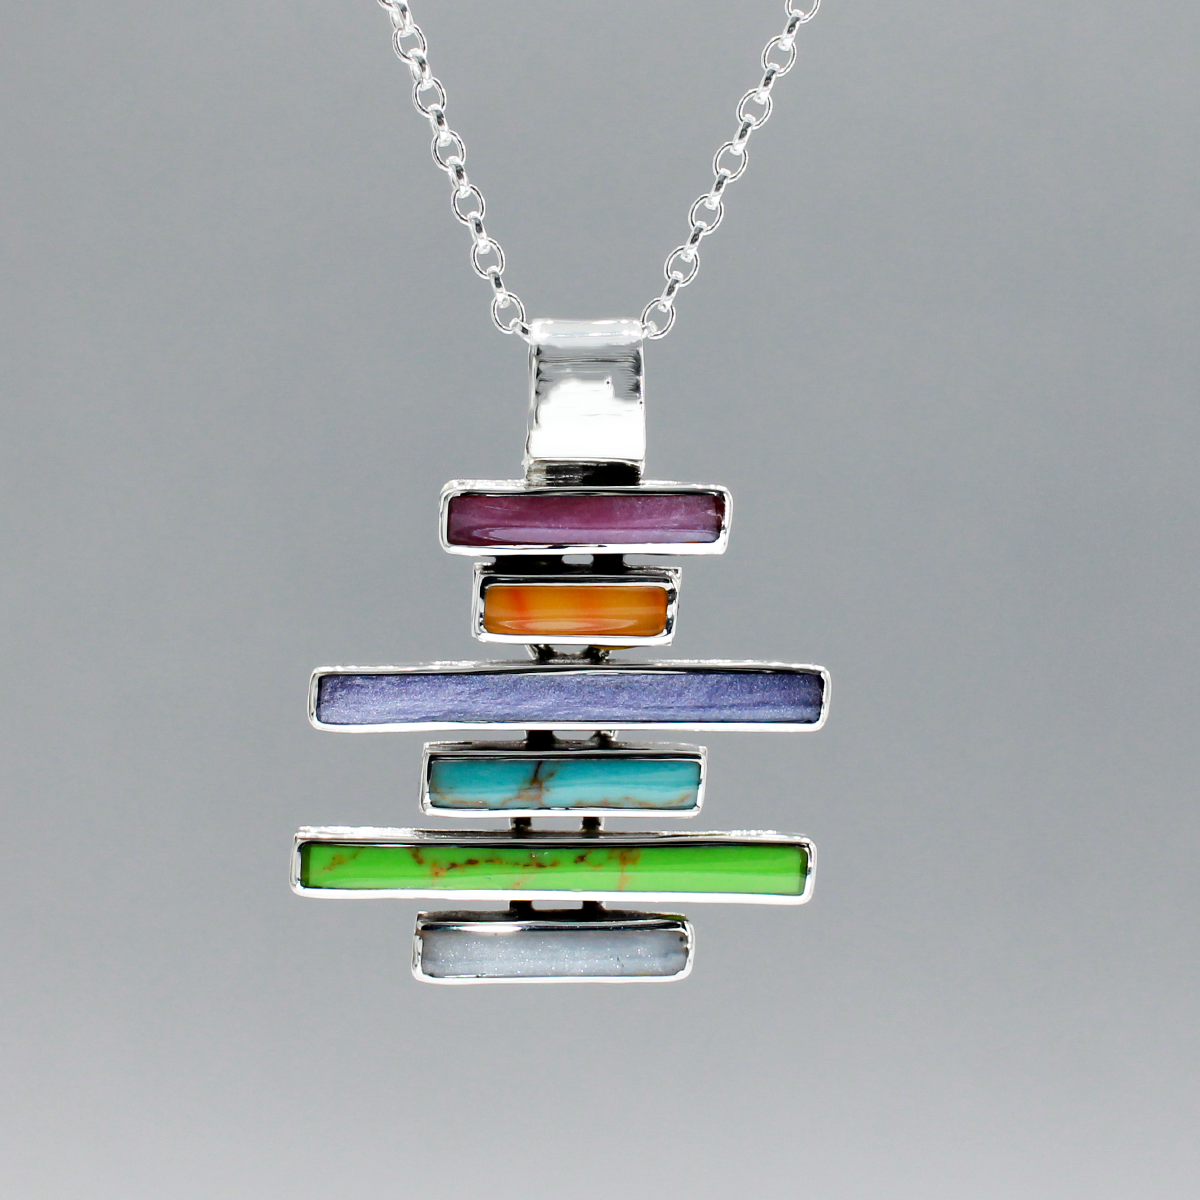 Sleveen's Multi-coloured Kinsale Steps Silver Pendant is an awe-inspiring blend of style and quality - measuring 26mm wide and 33mm high, made with .925 sterling silver. The adjustable 2.5mm silver Rolo chain (16"-18") adds a special touch that brings to life the rainbow of colours found in the iconic houses of Kinsale. Best of all, it's fitted with a 6mm bail for a perfect fit.